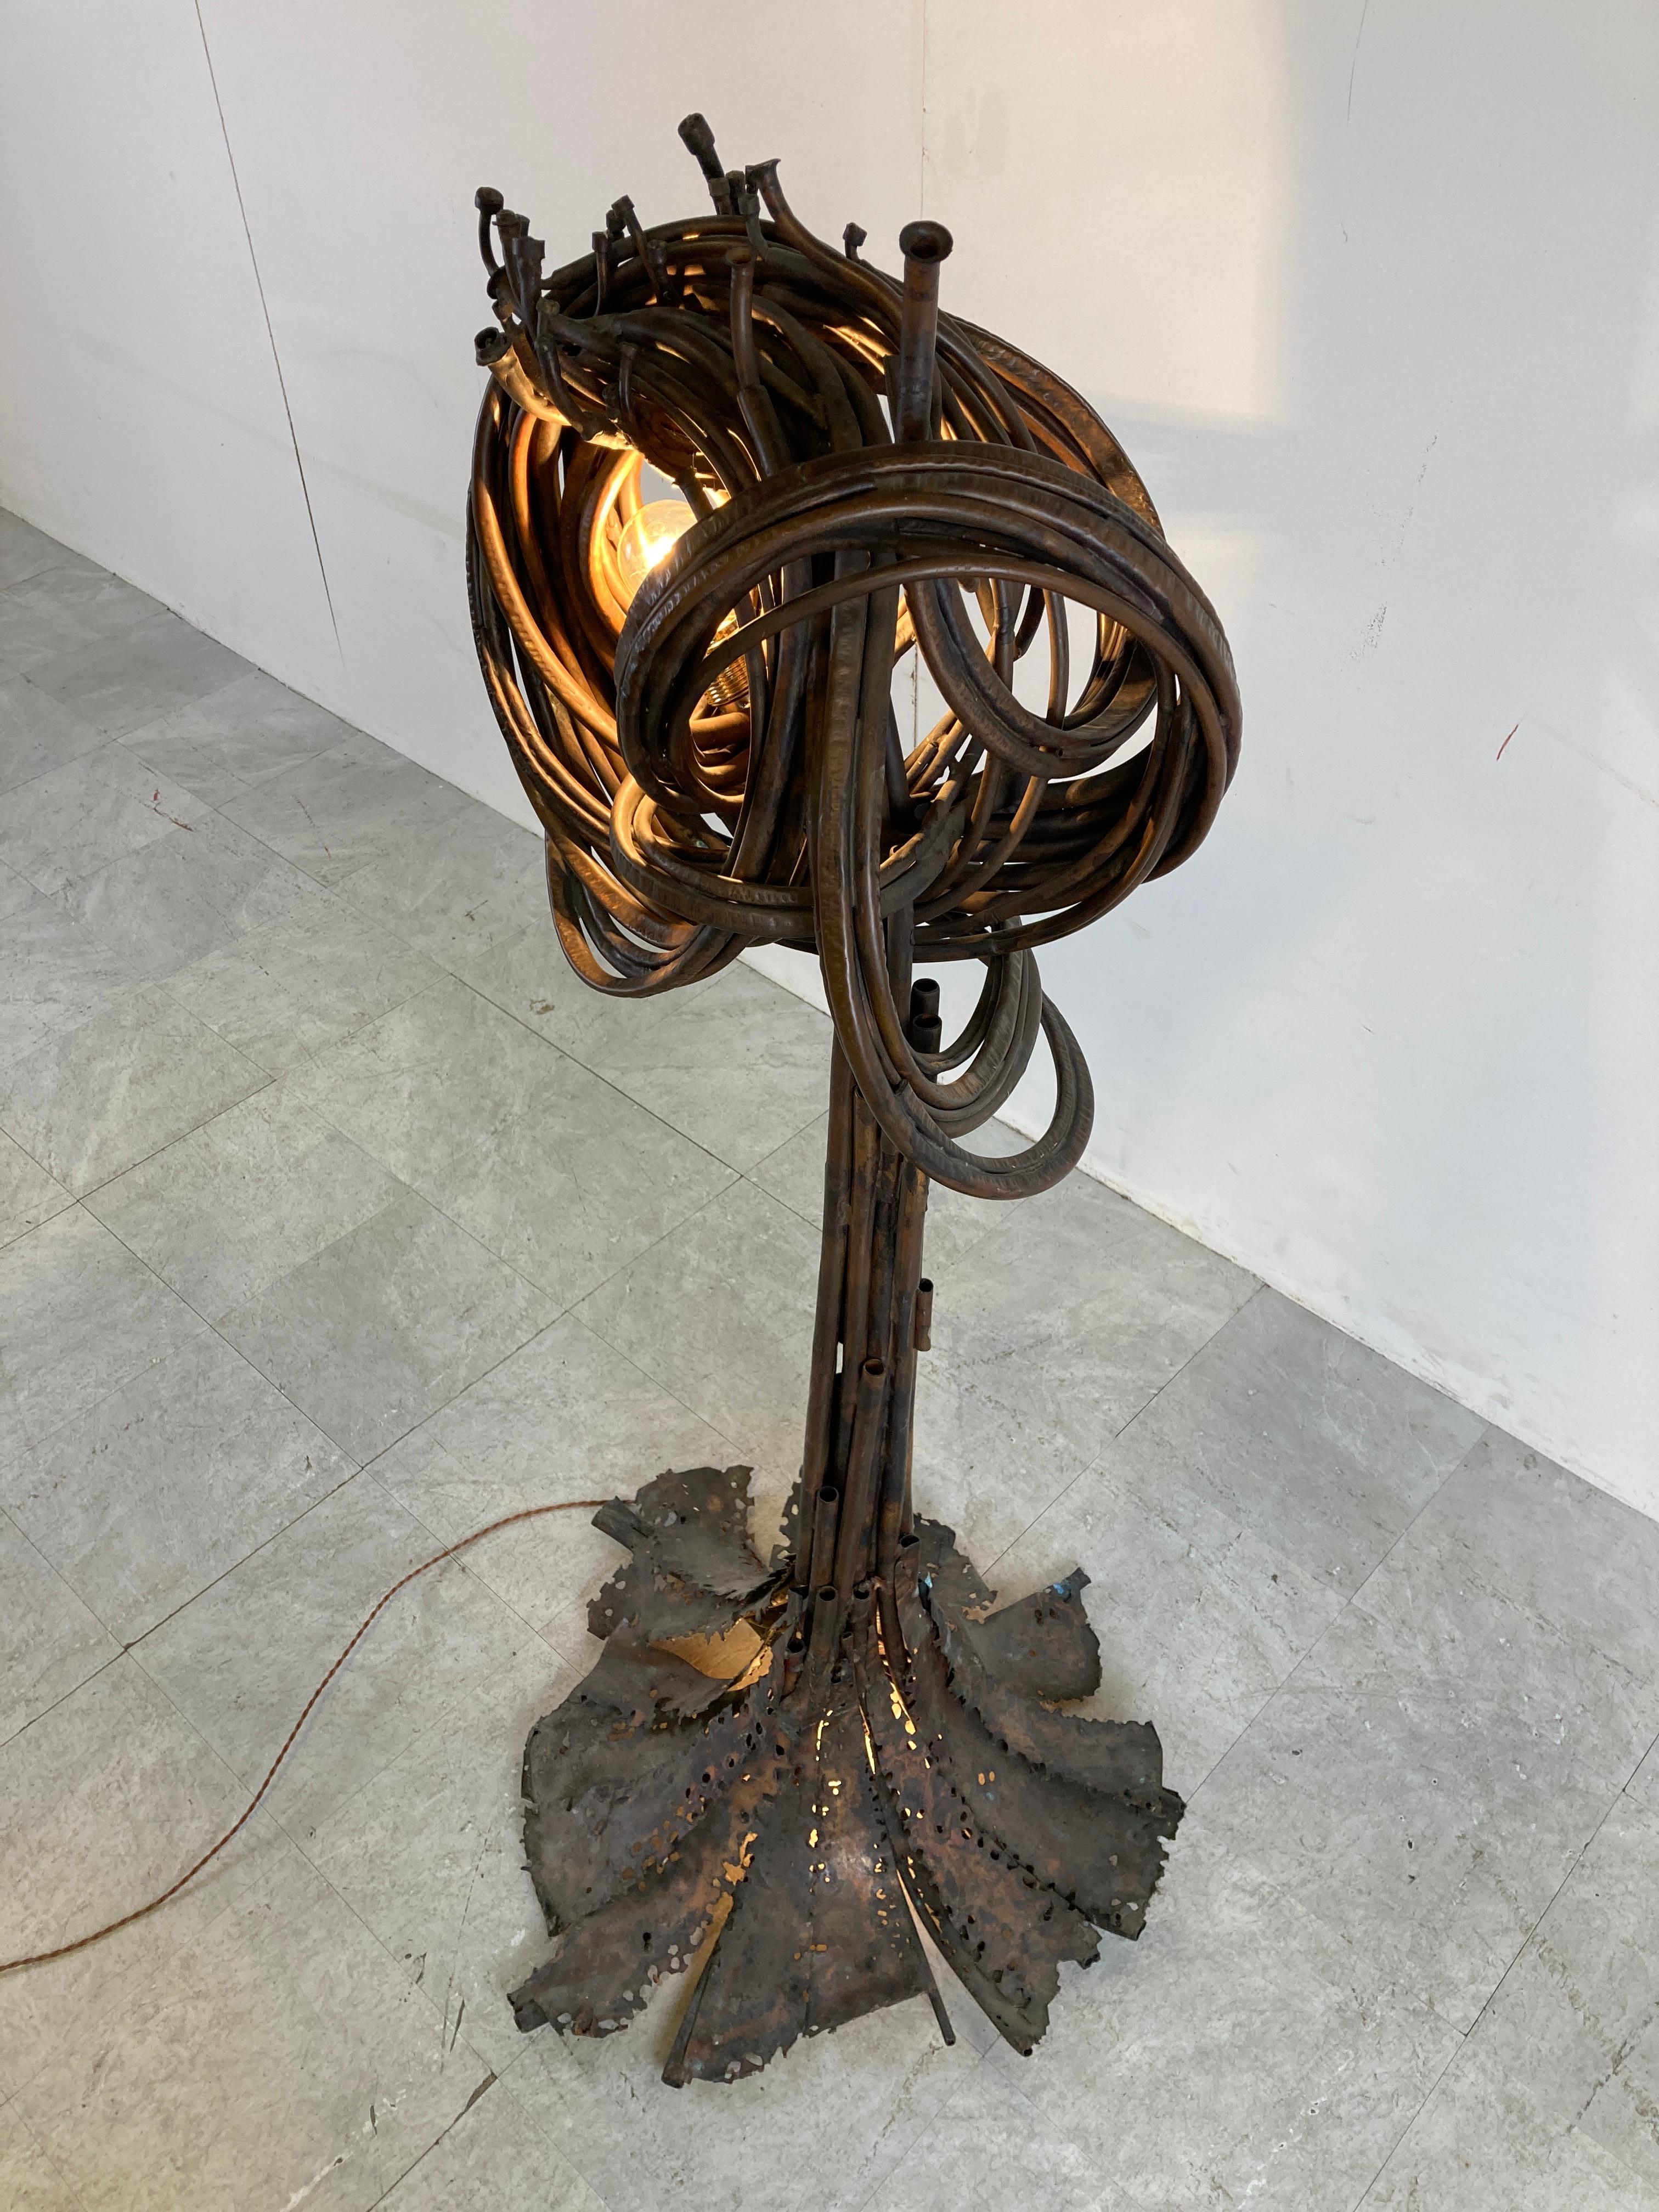 Striking 'fountain' shaped copper brutalist floor lamp by Jean Claeys (1941).

Jean Claeys is known for creating beautiful bronze sculptures.

This floor lamp is another of his masterpieces as was originally a sculpture which was converted into